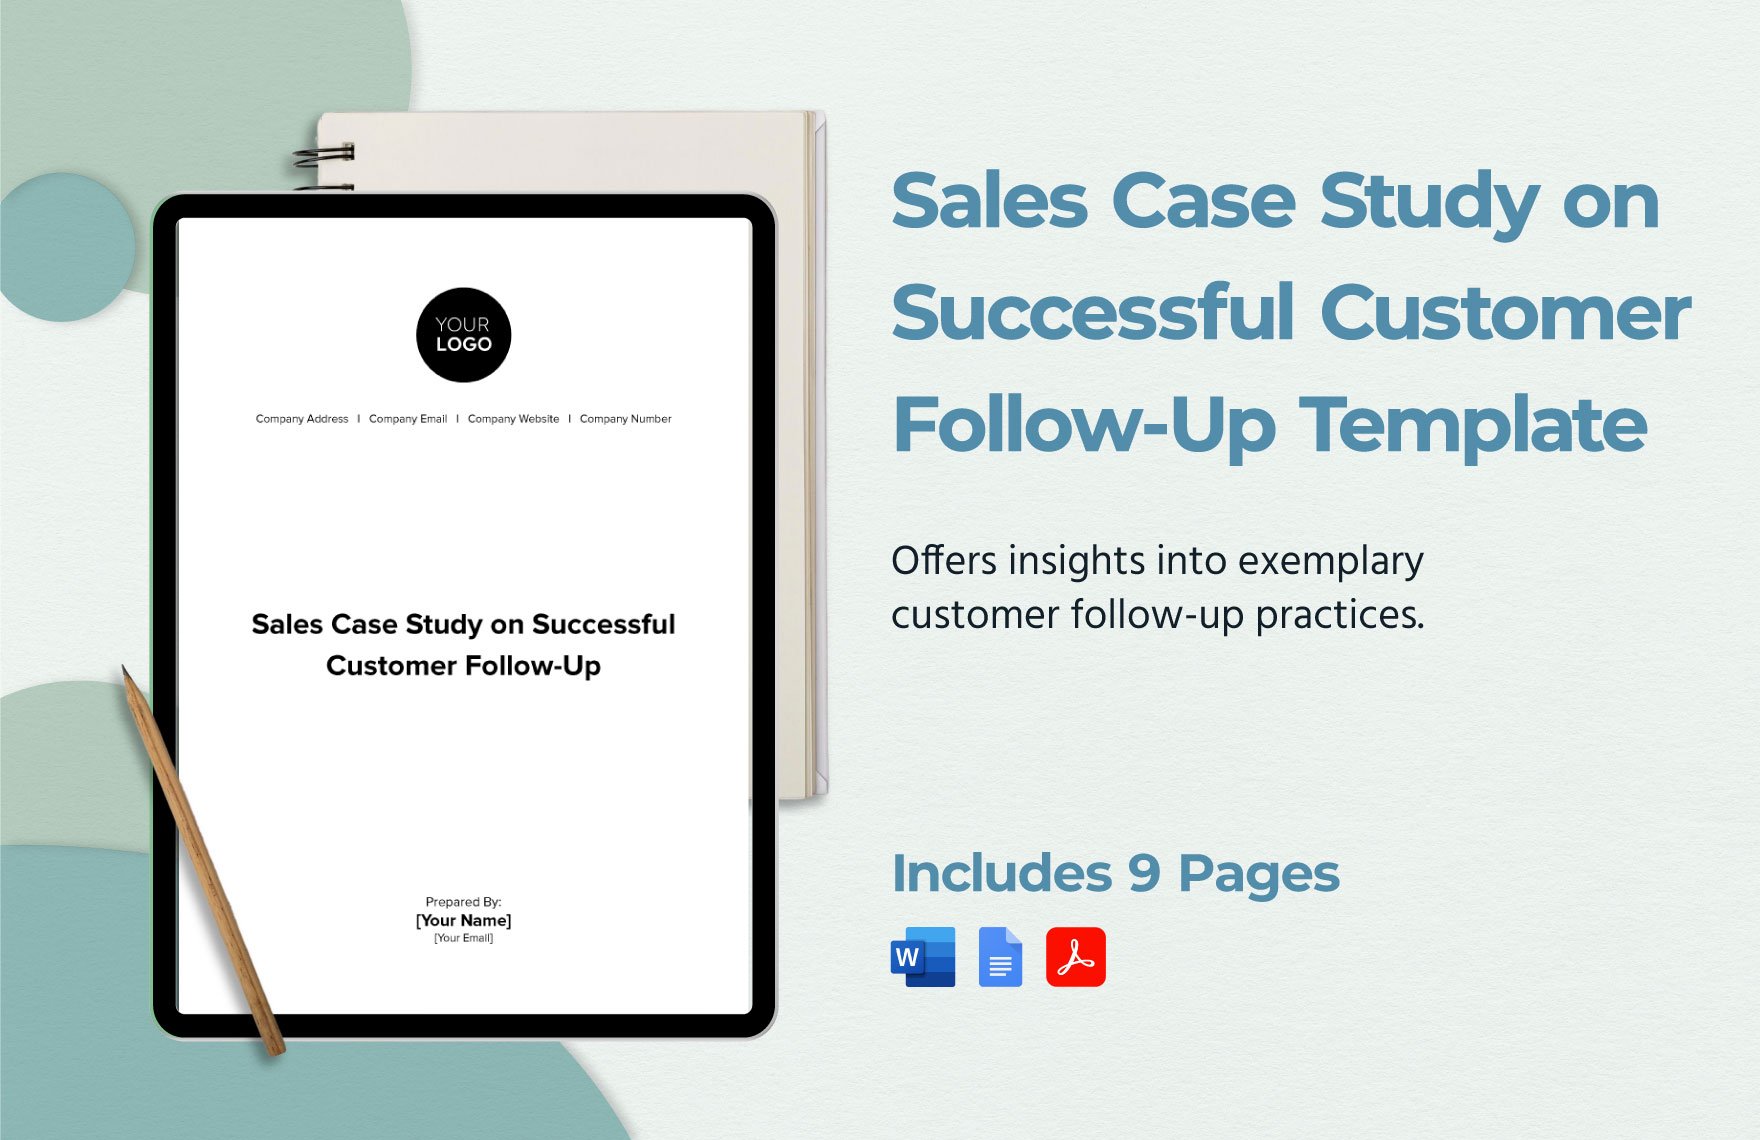 Sales Case Study on Successful Customer Follow-Up Template